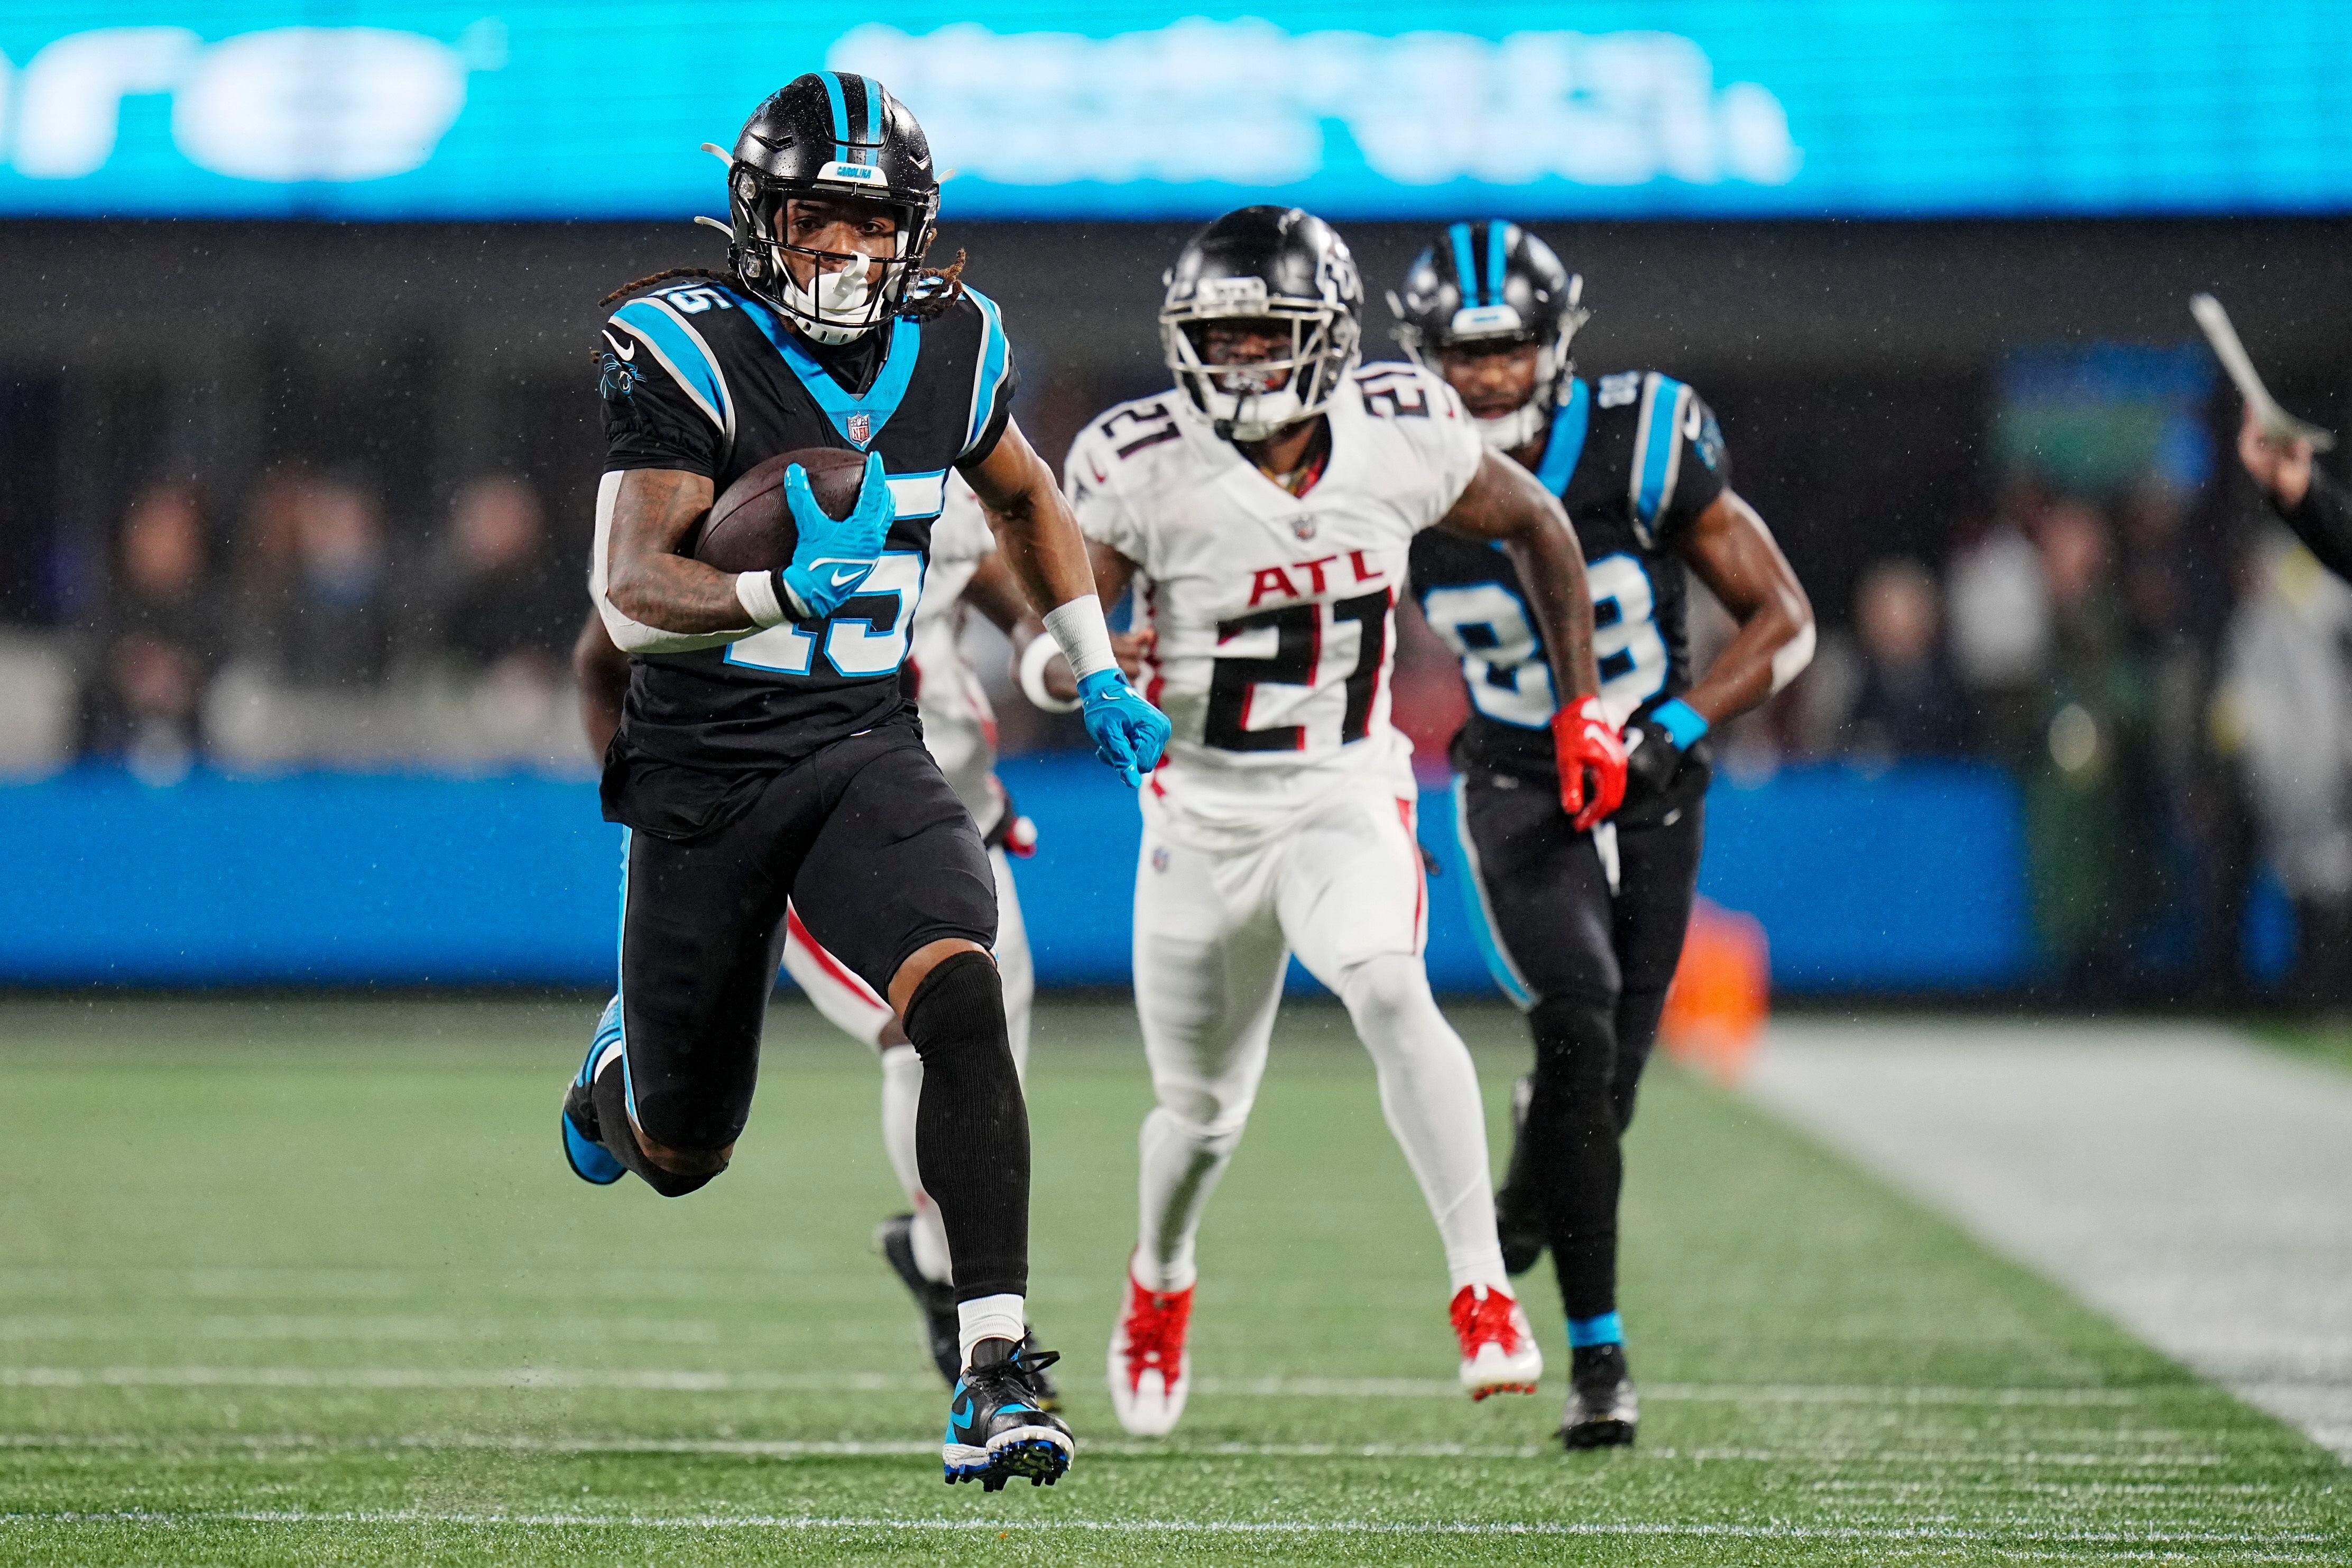 Foreman leads Panthers past rival Falcons in rain, 25-15